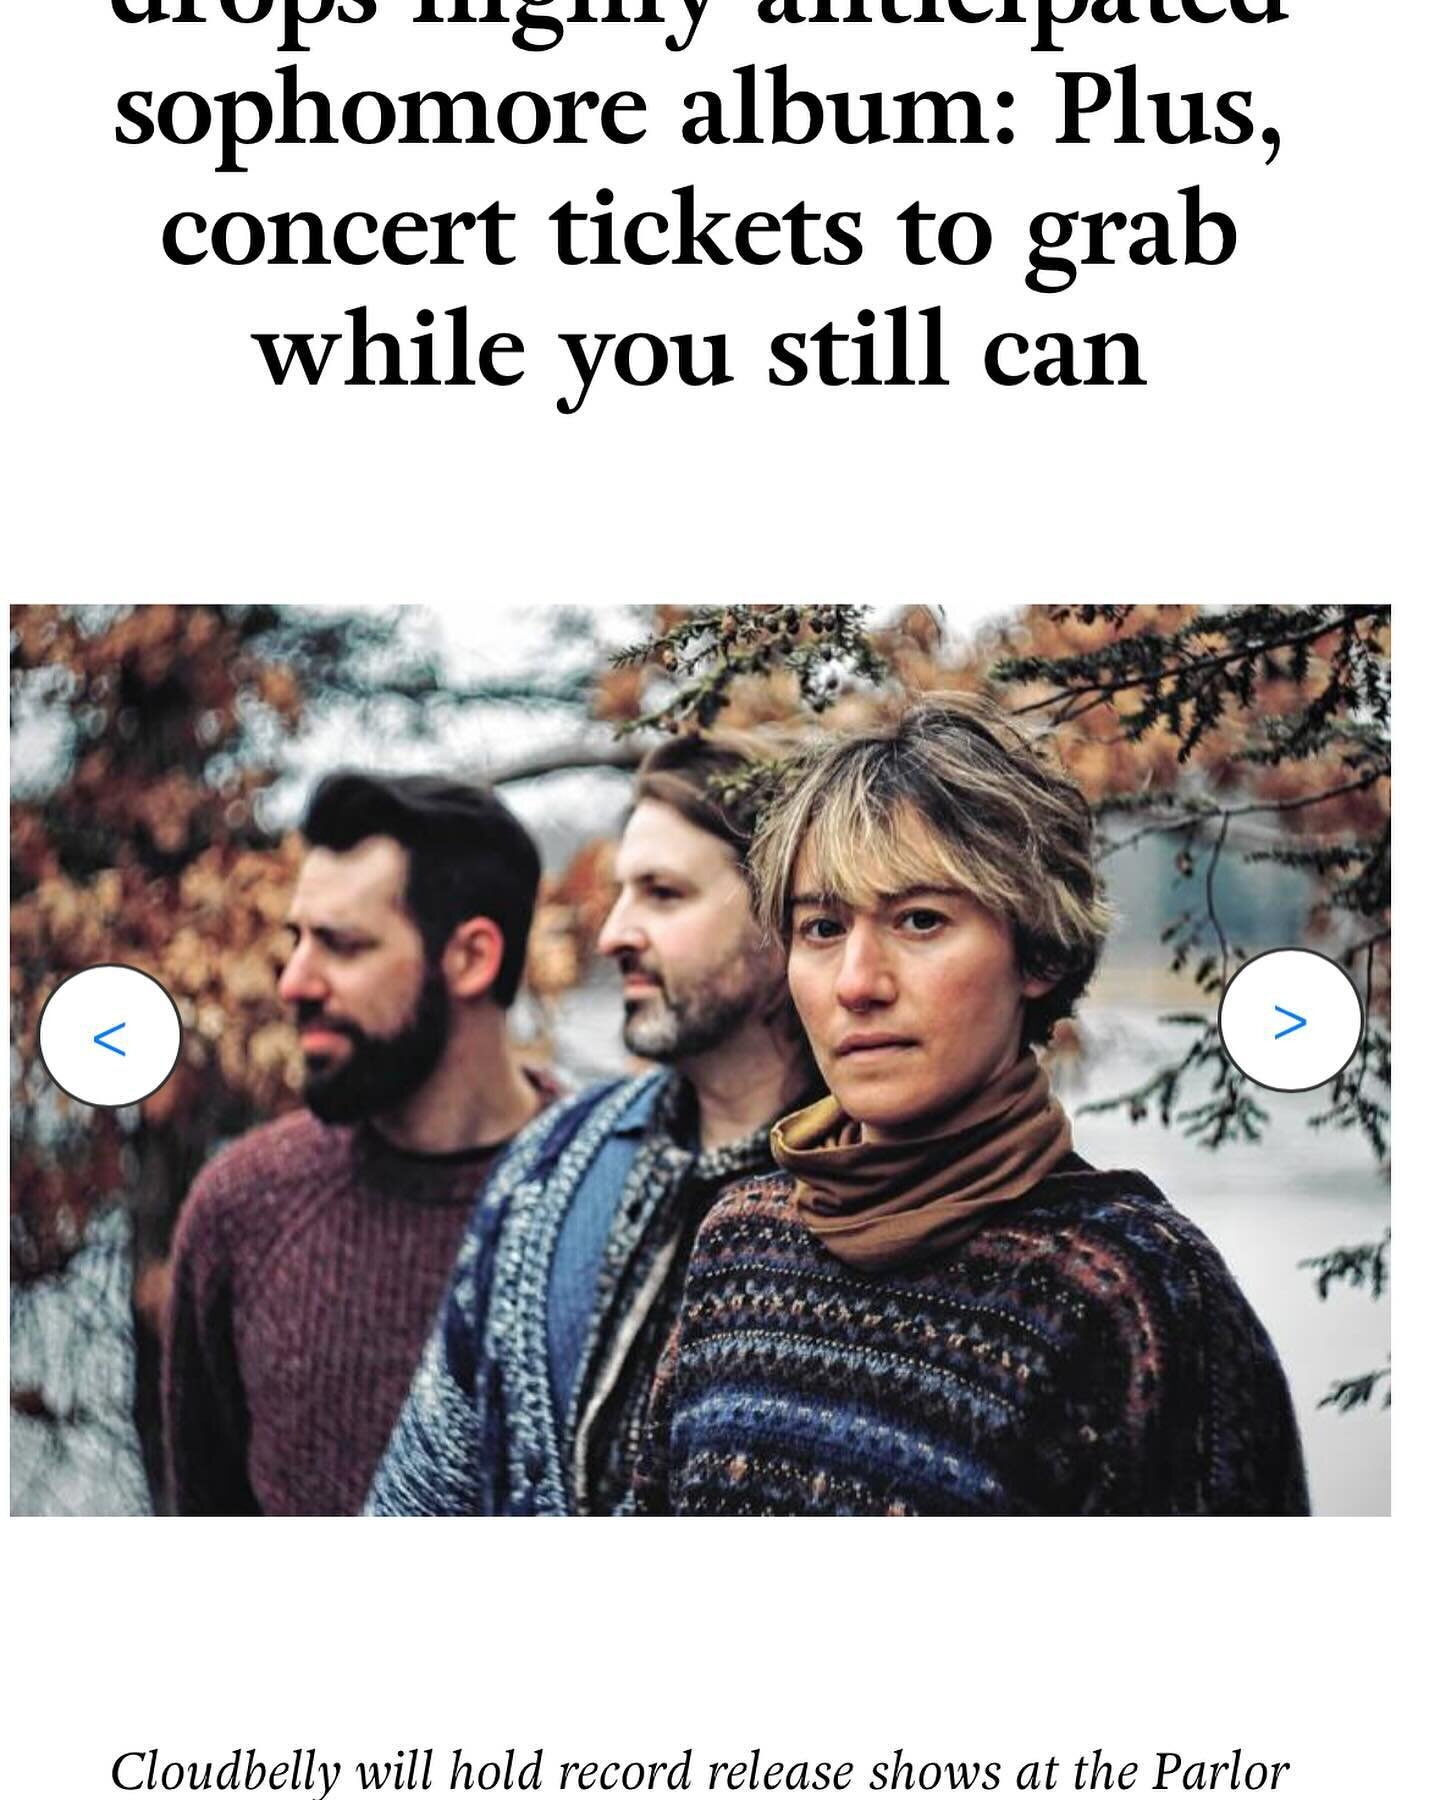 Duuude @sheryl.hunter.71 at the Greenfield Recorder wrote THE NICEST AND LOVELIEST things about I know I know I know!!! Thank you Sheryl, we love you!!! 

Swipe to the video to hear about wild @sheryl.hunter.71 &amp; @just_roots &amp; @lisabastoni en